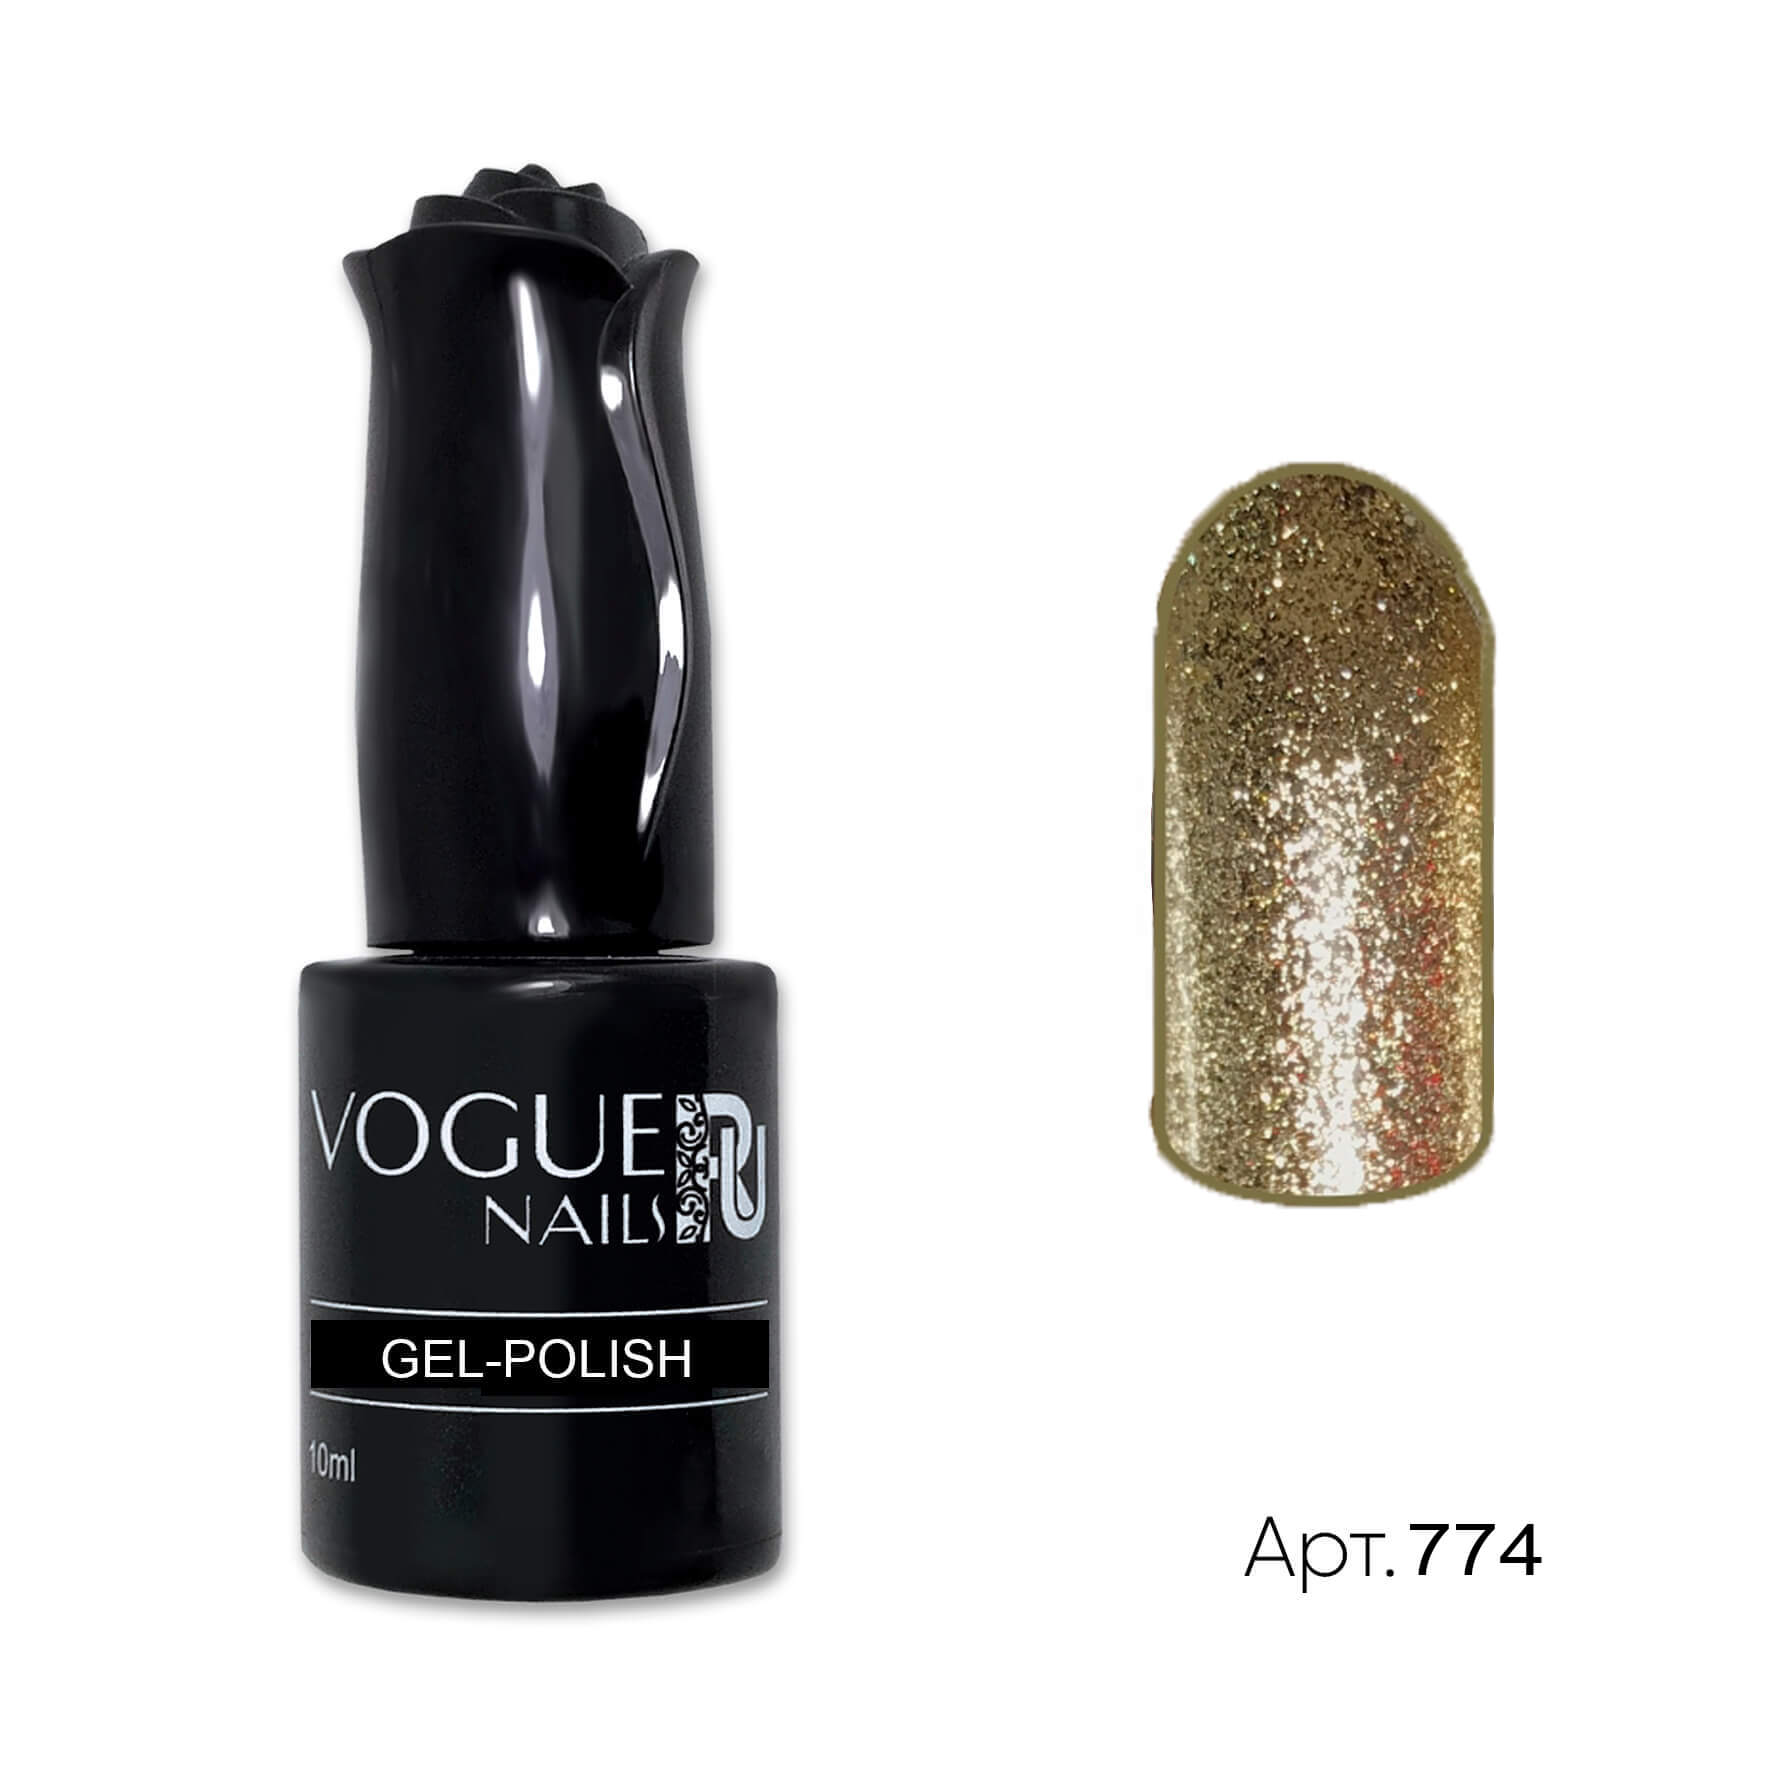 Vogue Nails "Pajama Party" Gel Glitter - Party Girl